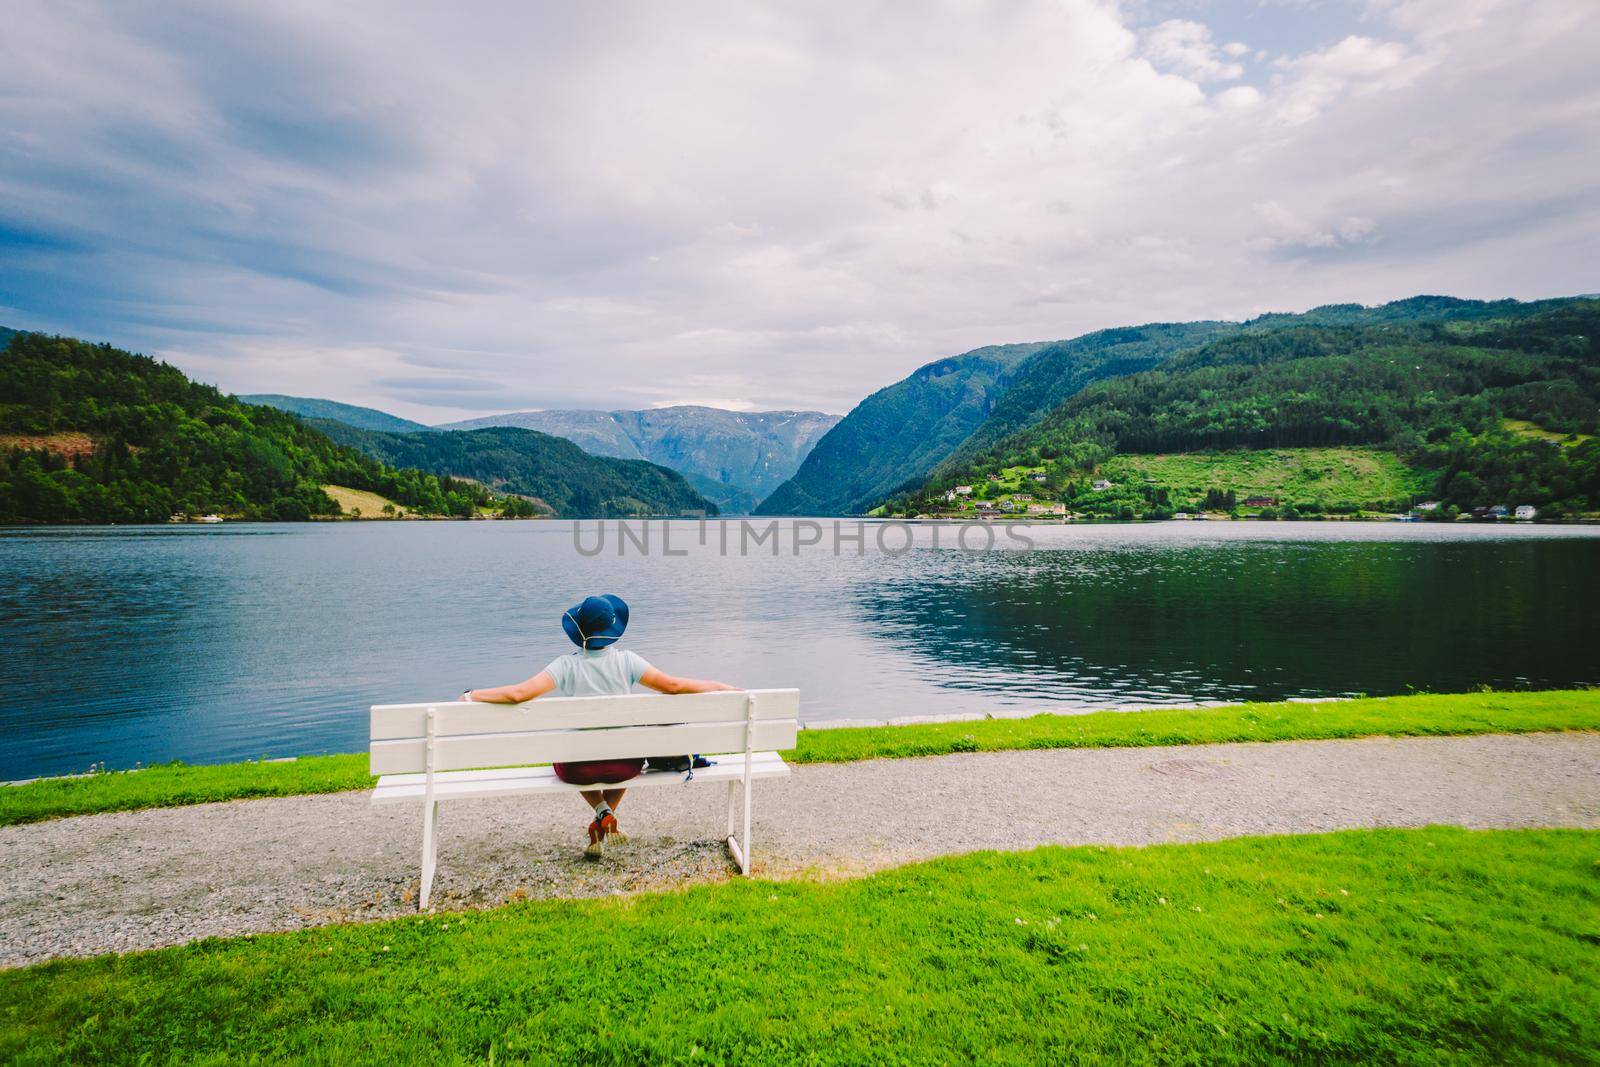 Woman sitting on a bench looking at the fjord in Ulvik, Norway. Fjord coastal promenade in Ulvik, Hordaland county, Norge. Lonely tourist in hat sits back on bench and admires scenery Scandinavia.